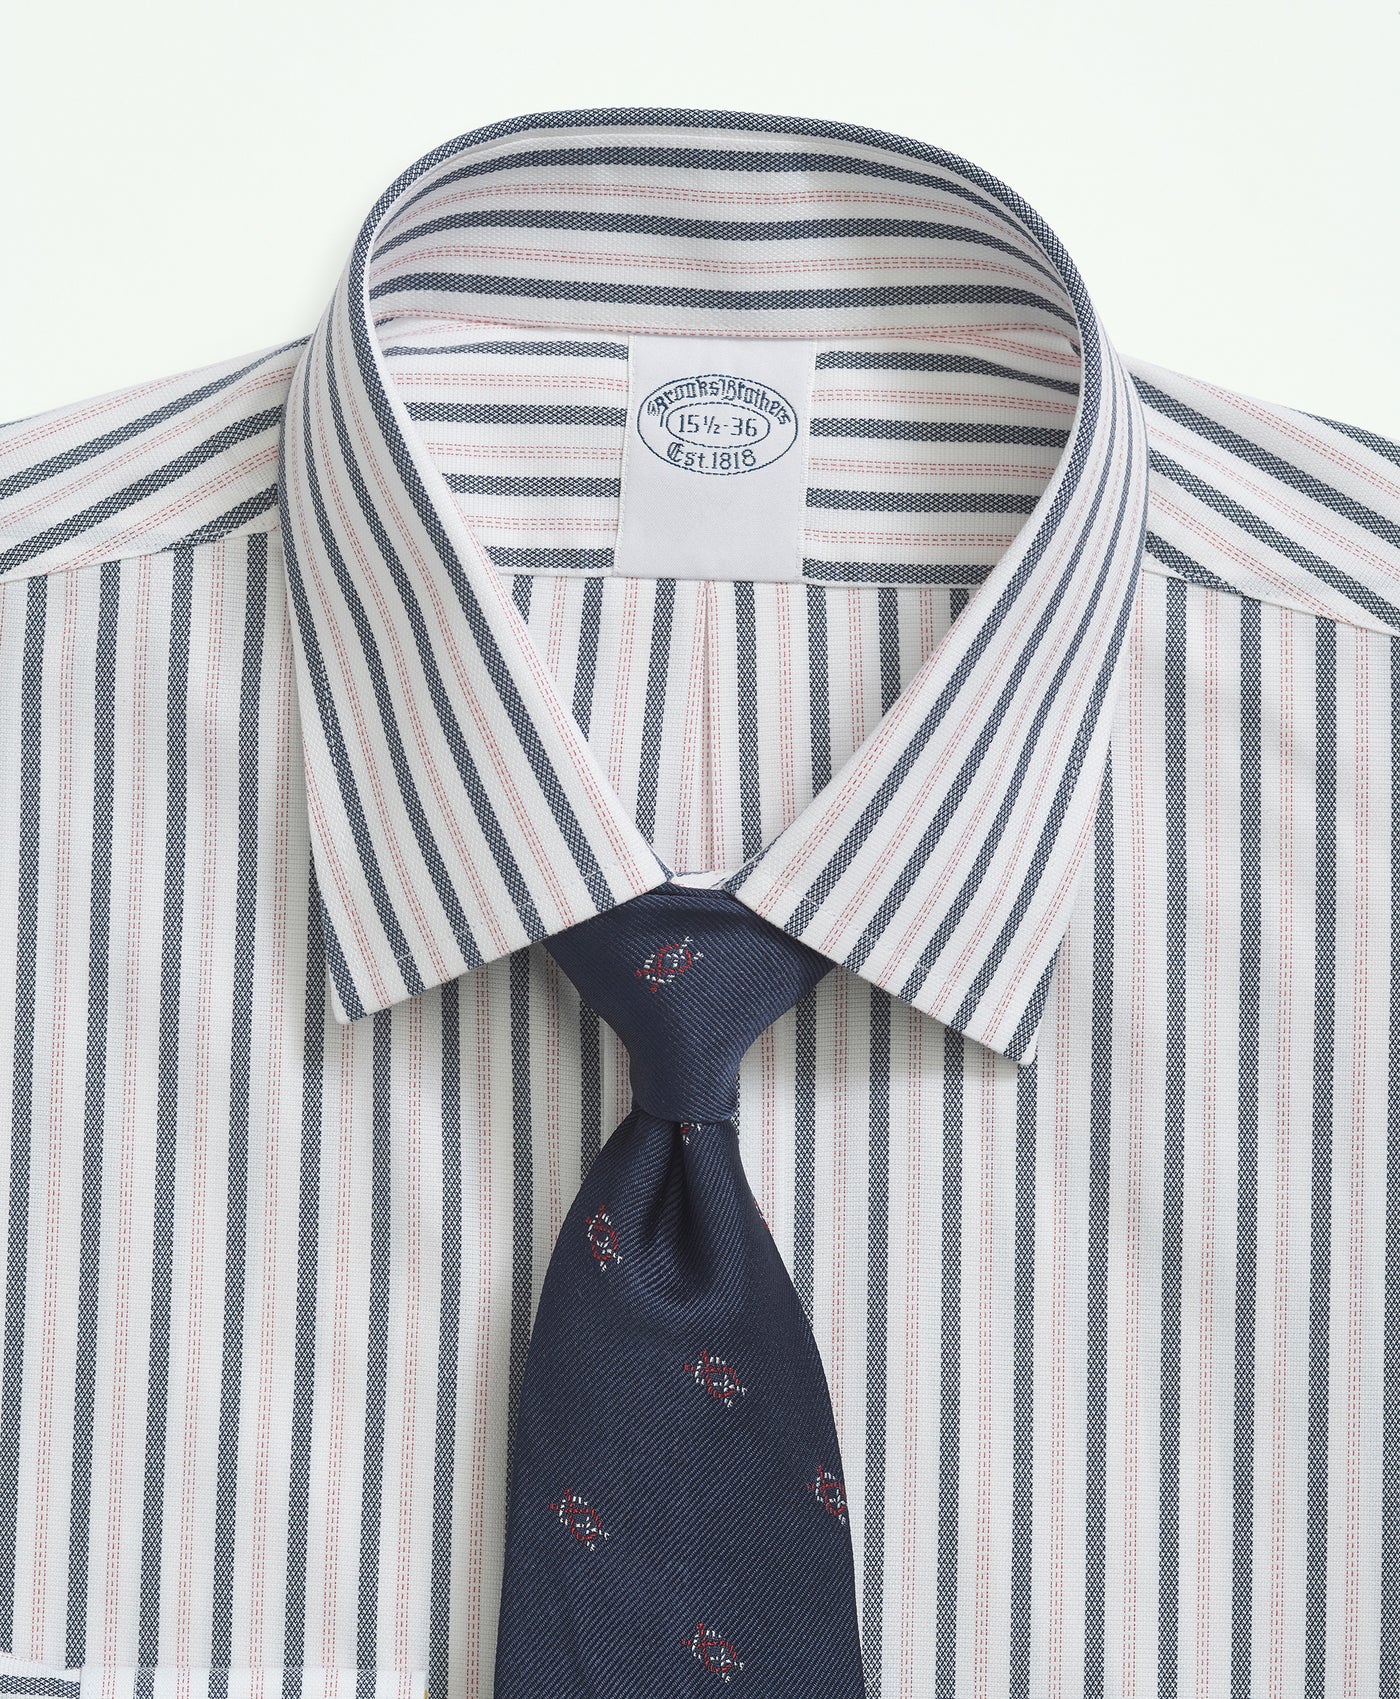 Stretch Regular-Fit Dress Shirt, Non-Iron Royal Oxford Ainsley Collar, Bold Stripe - Brooks Brothers Canada